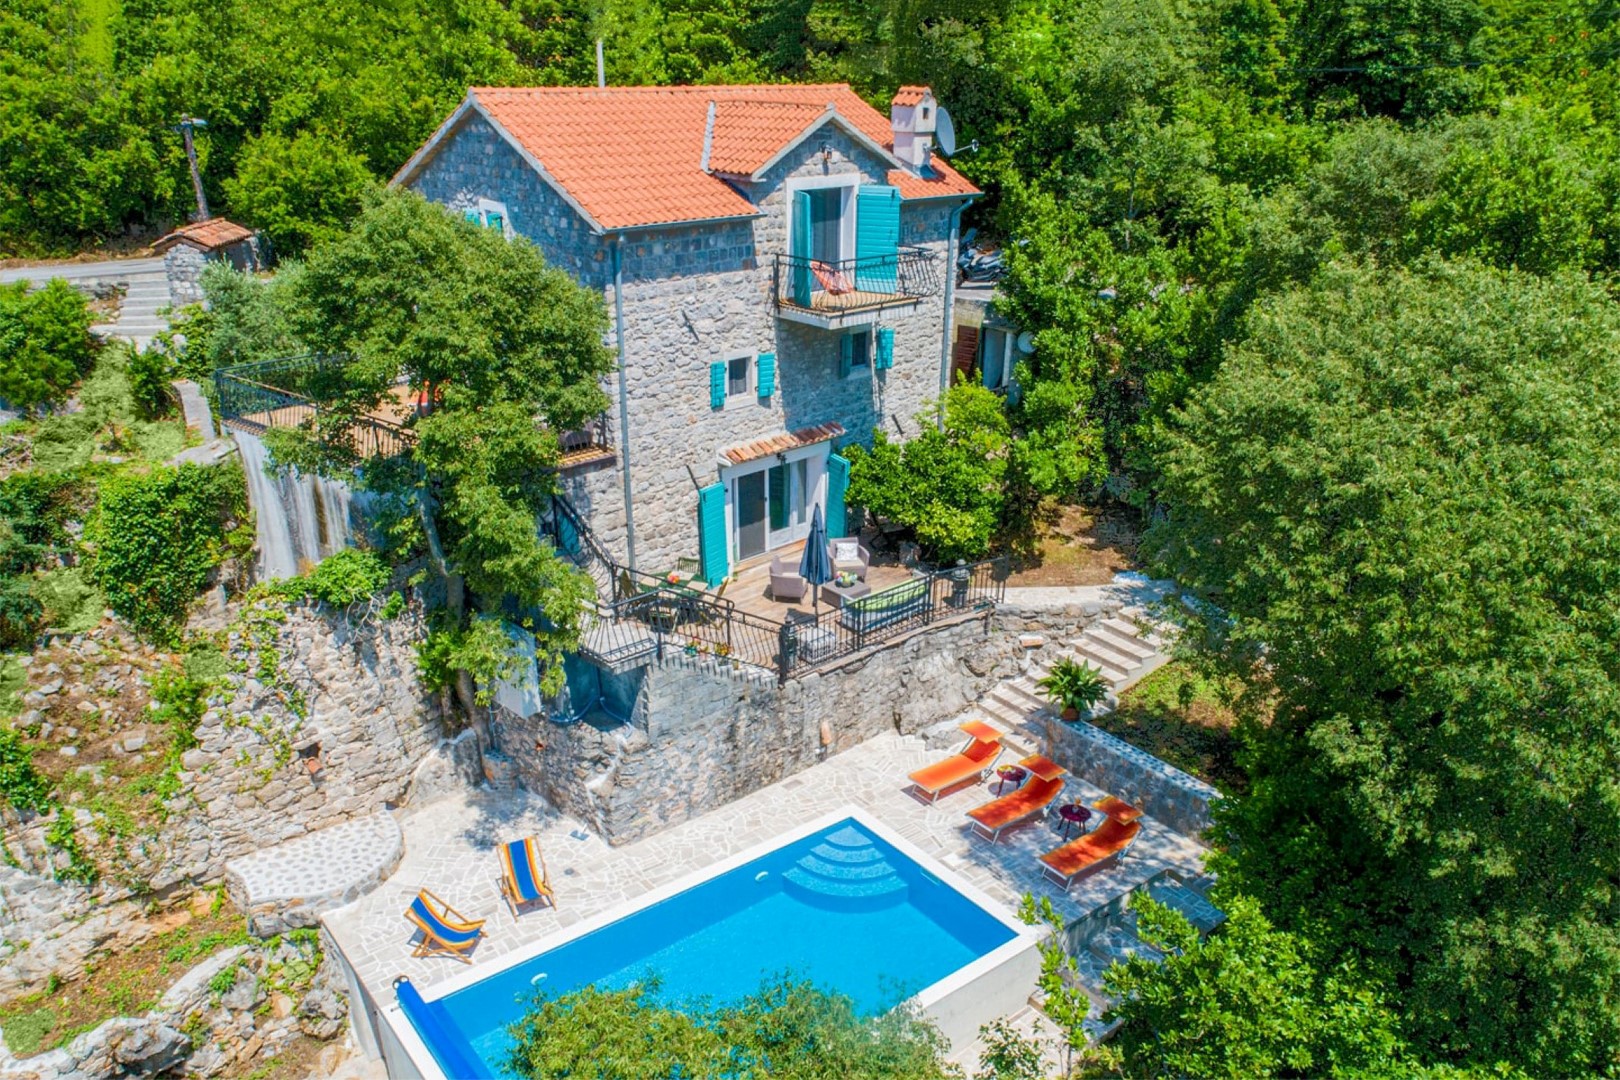 Lustica, Milovici - luxuriously renovated stone house with a swimming pool